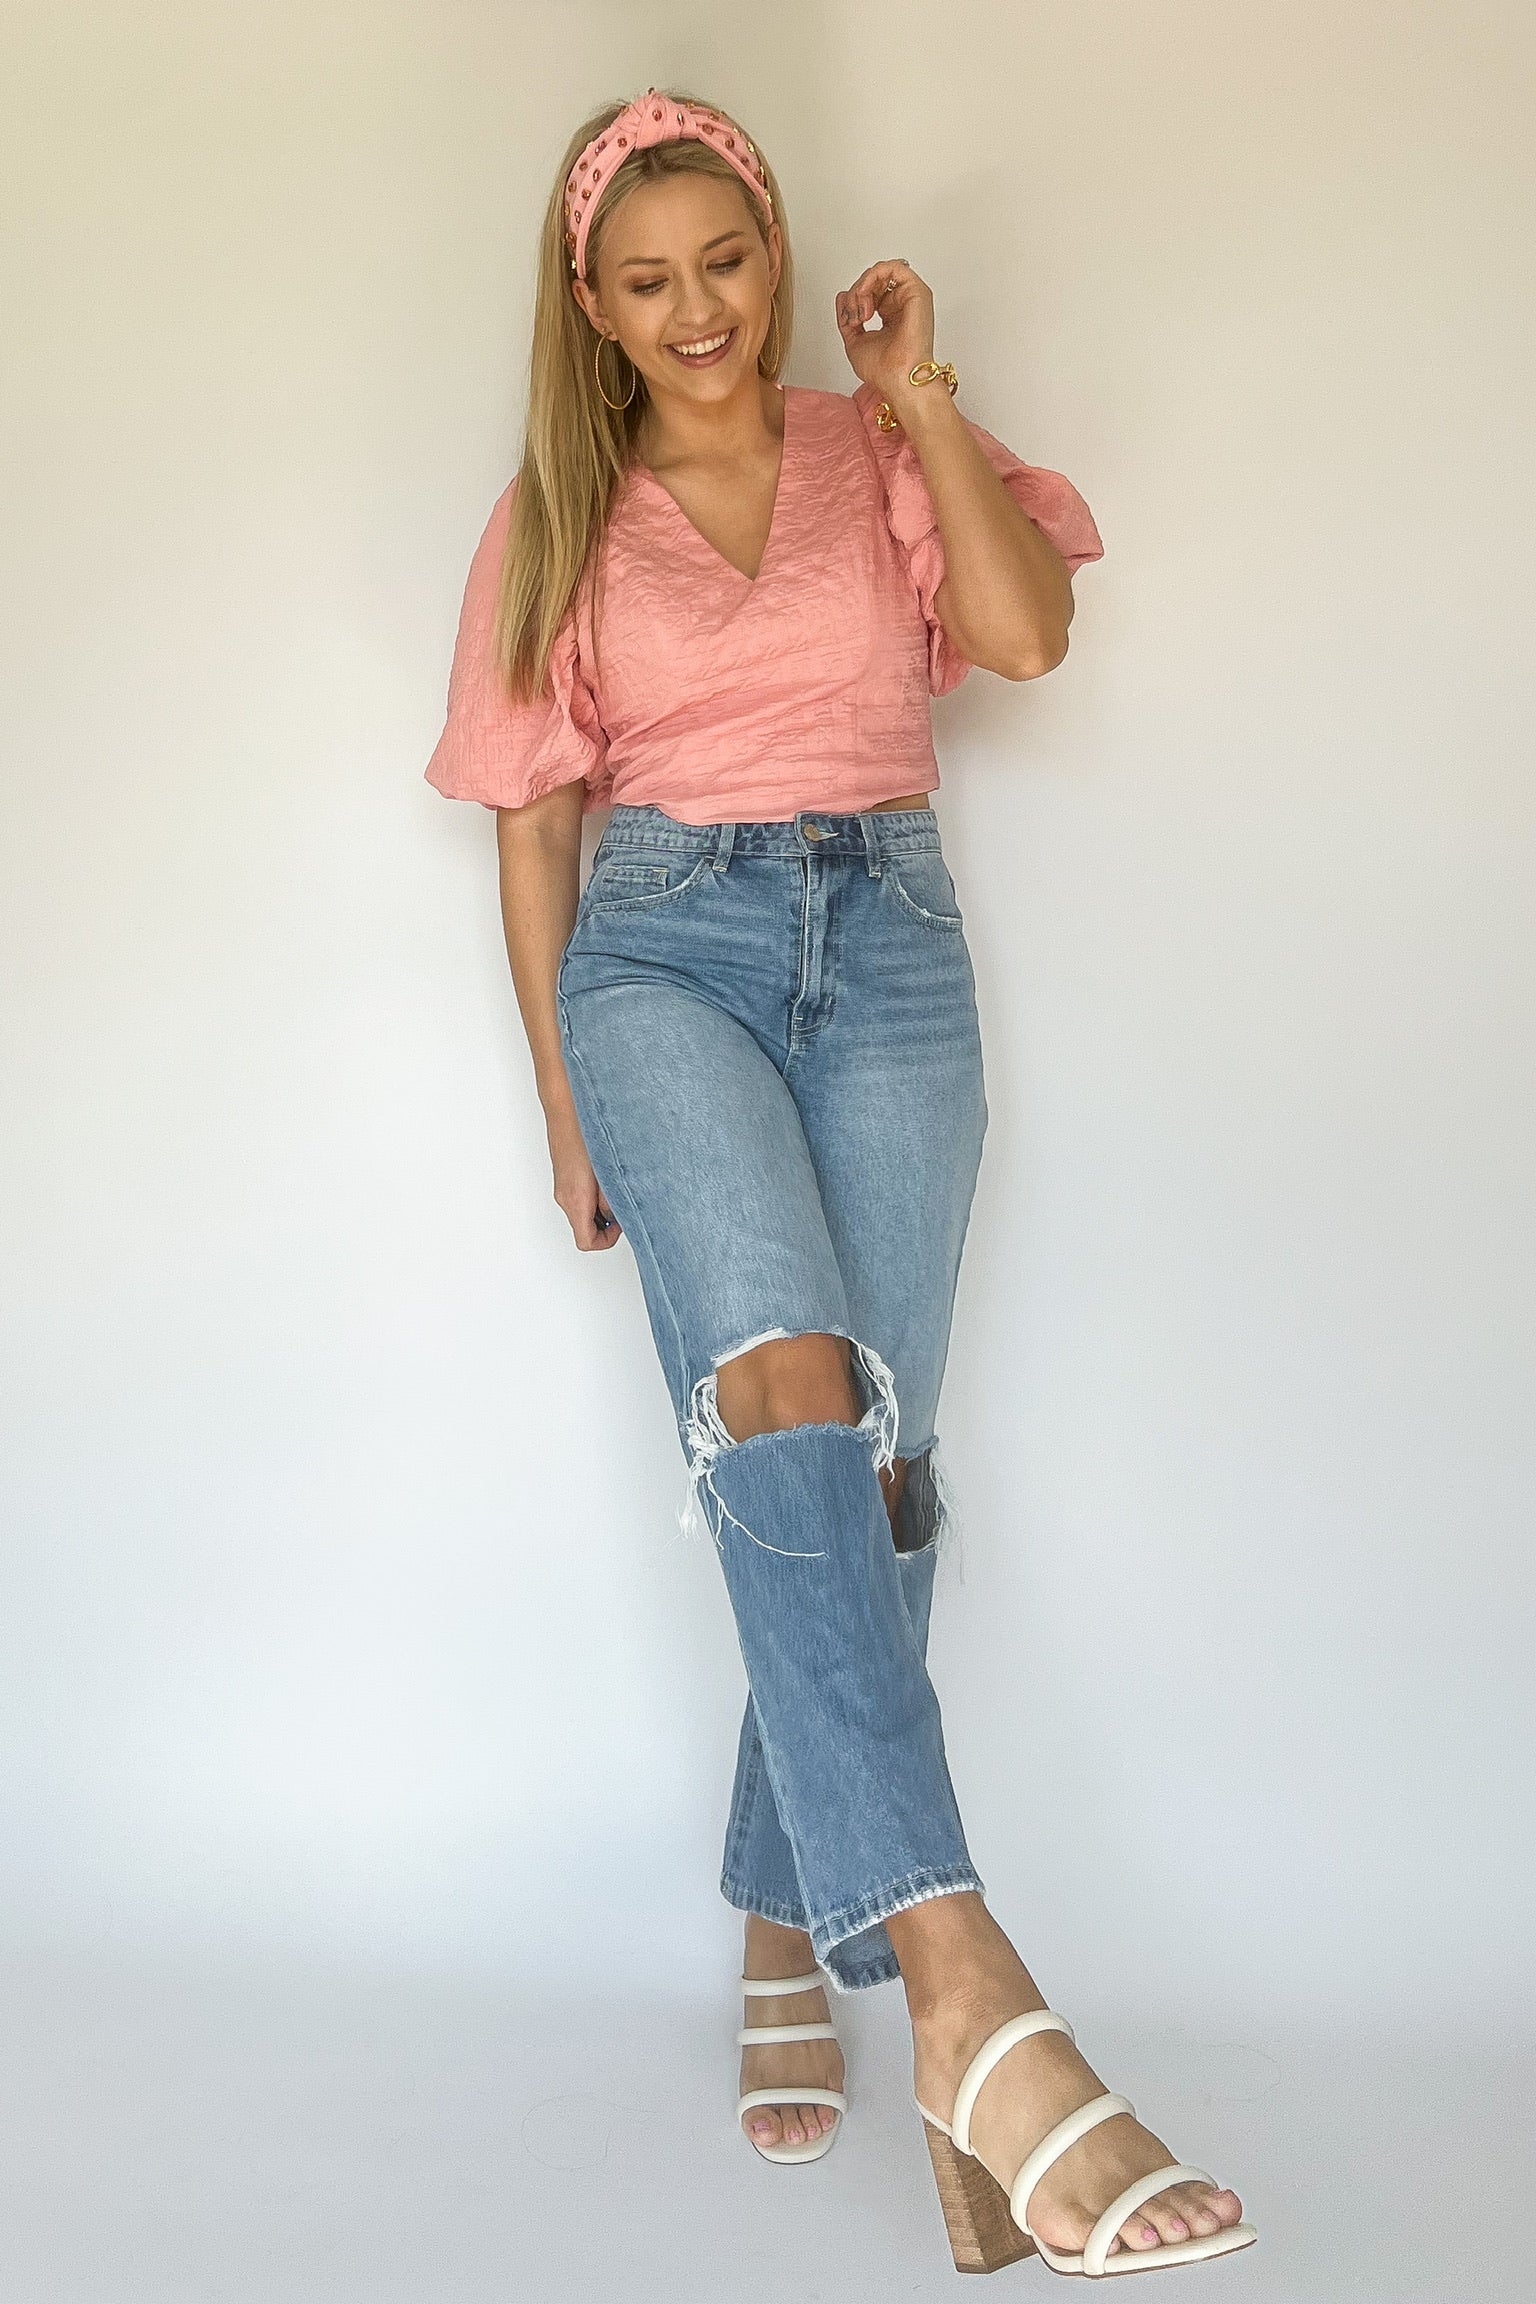 august apparel pink puff sleeve top